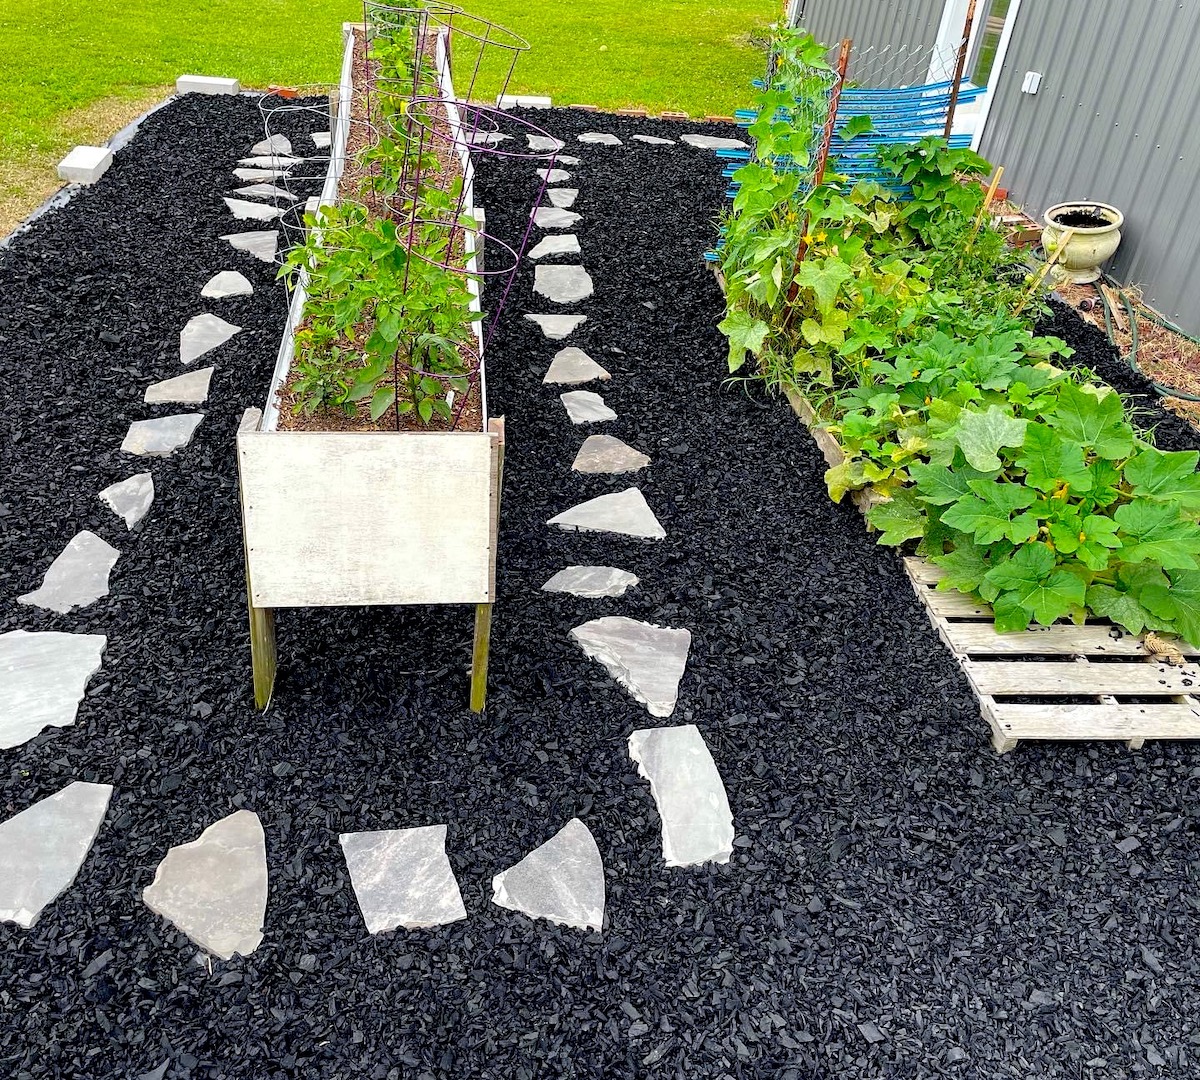 Black rubber mulch is laid around raised and elevated garden beds, with stepping stones throughout.